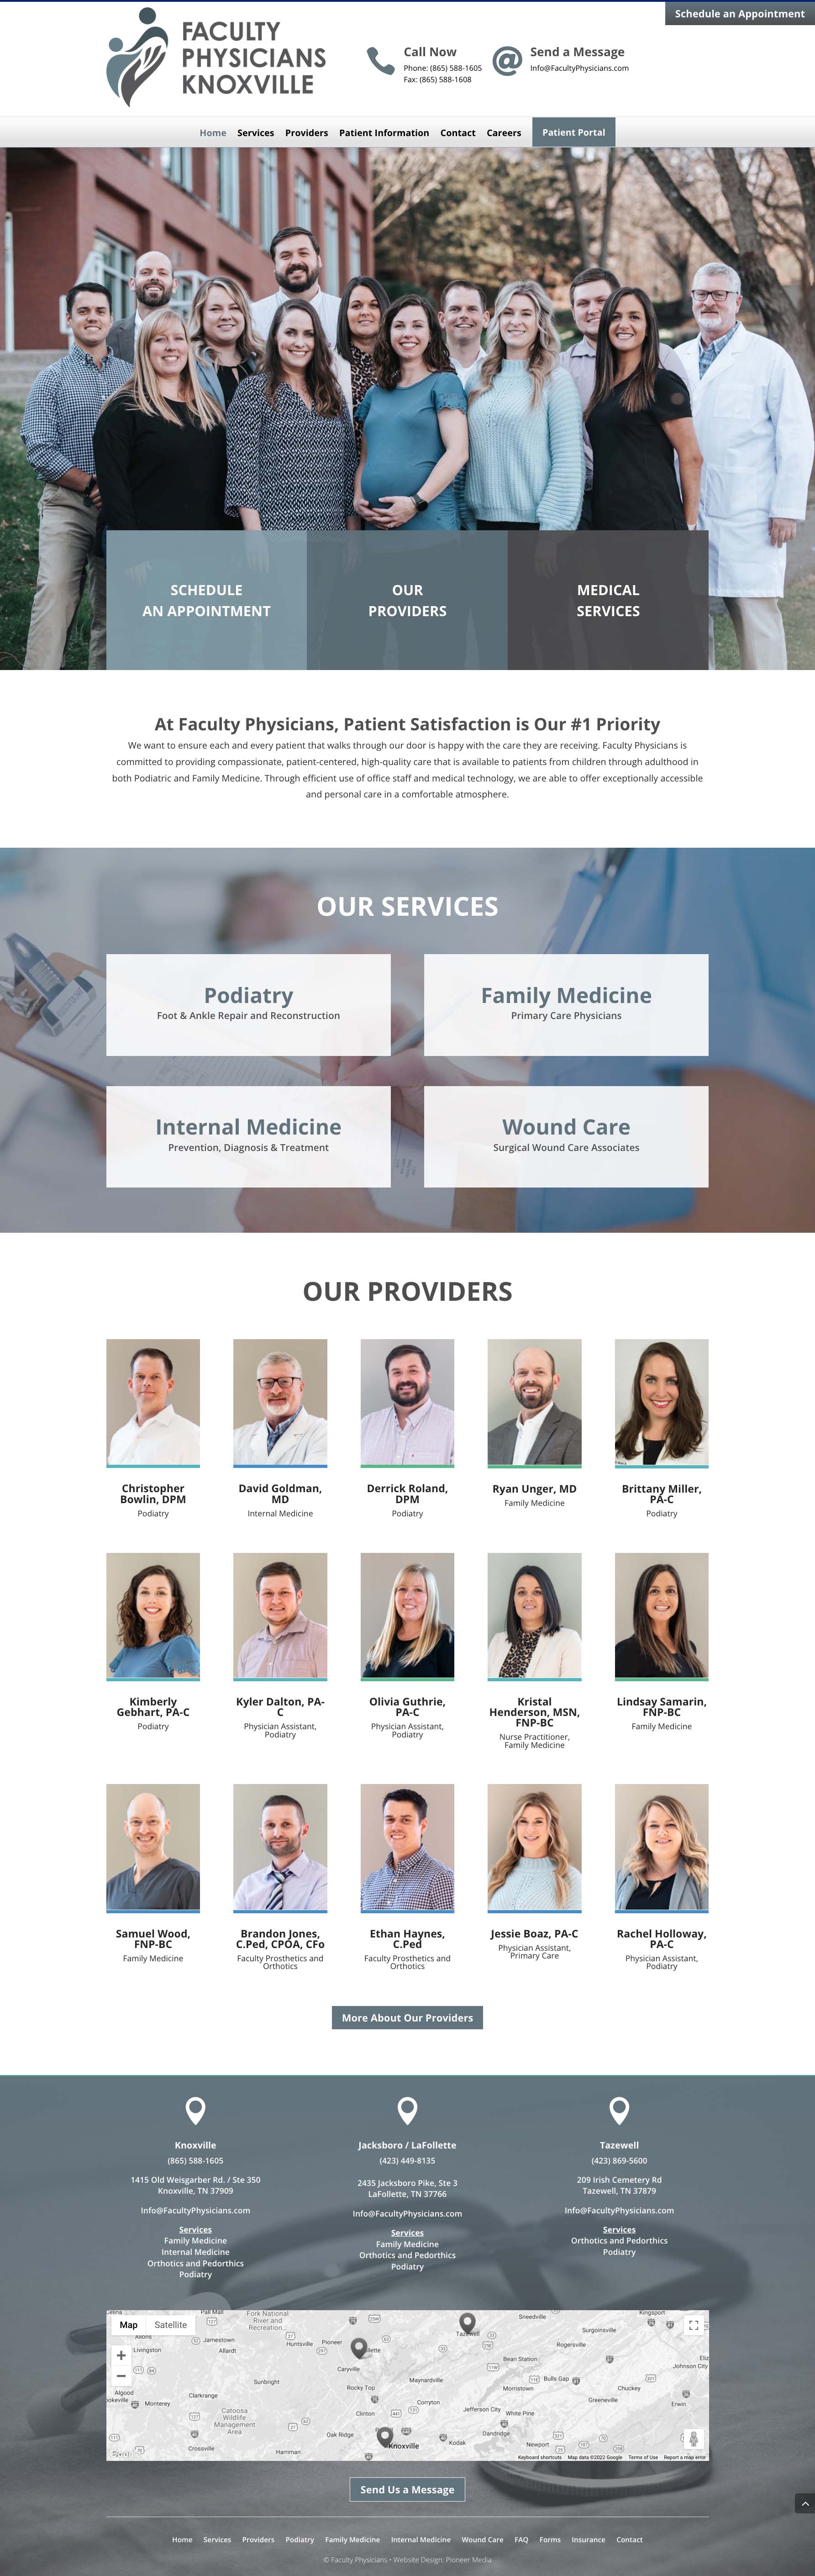 Faculty Physicians Homepage Screenshot